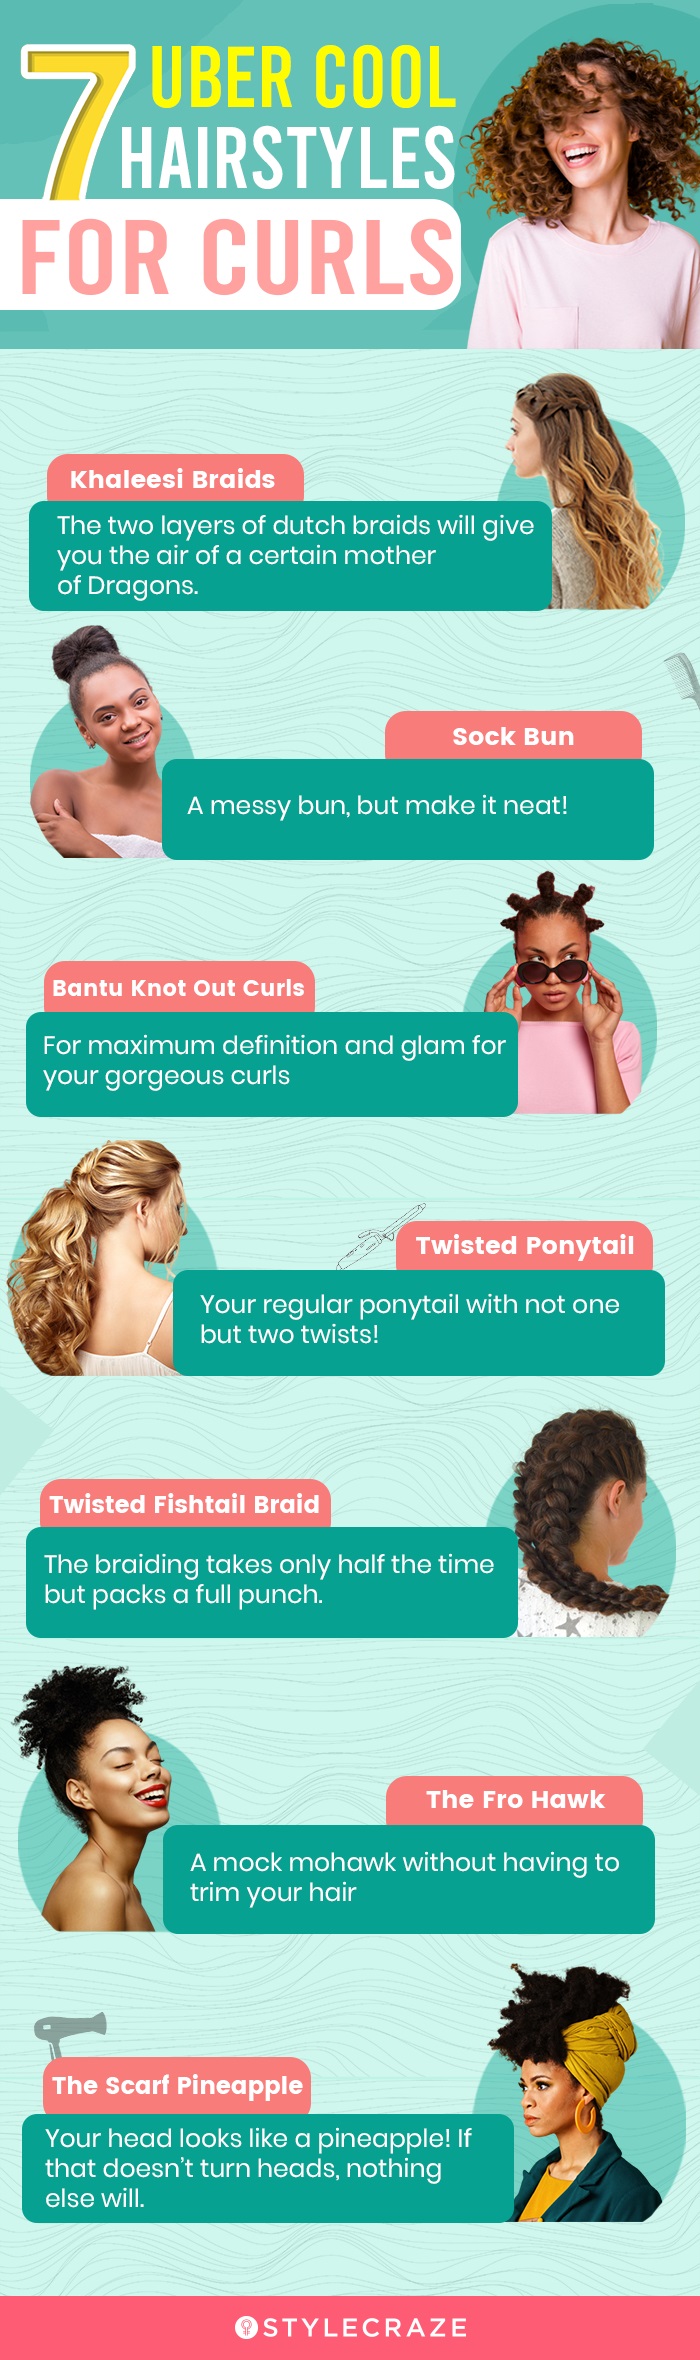 7 uber cool hairstyles for curls (infographic)